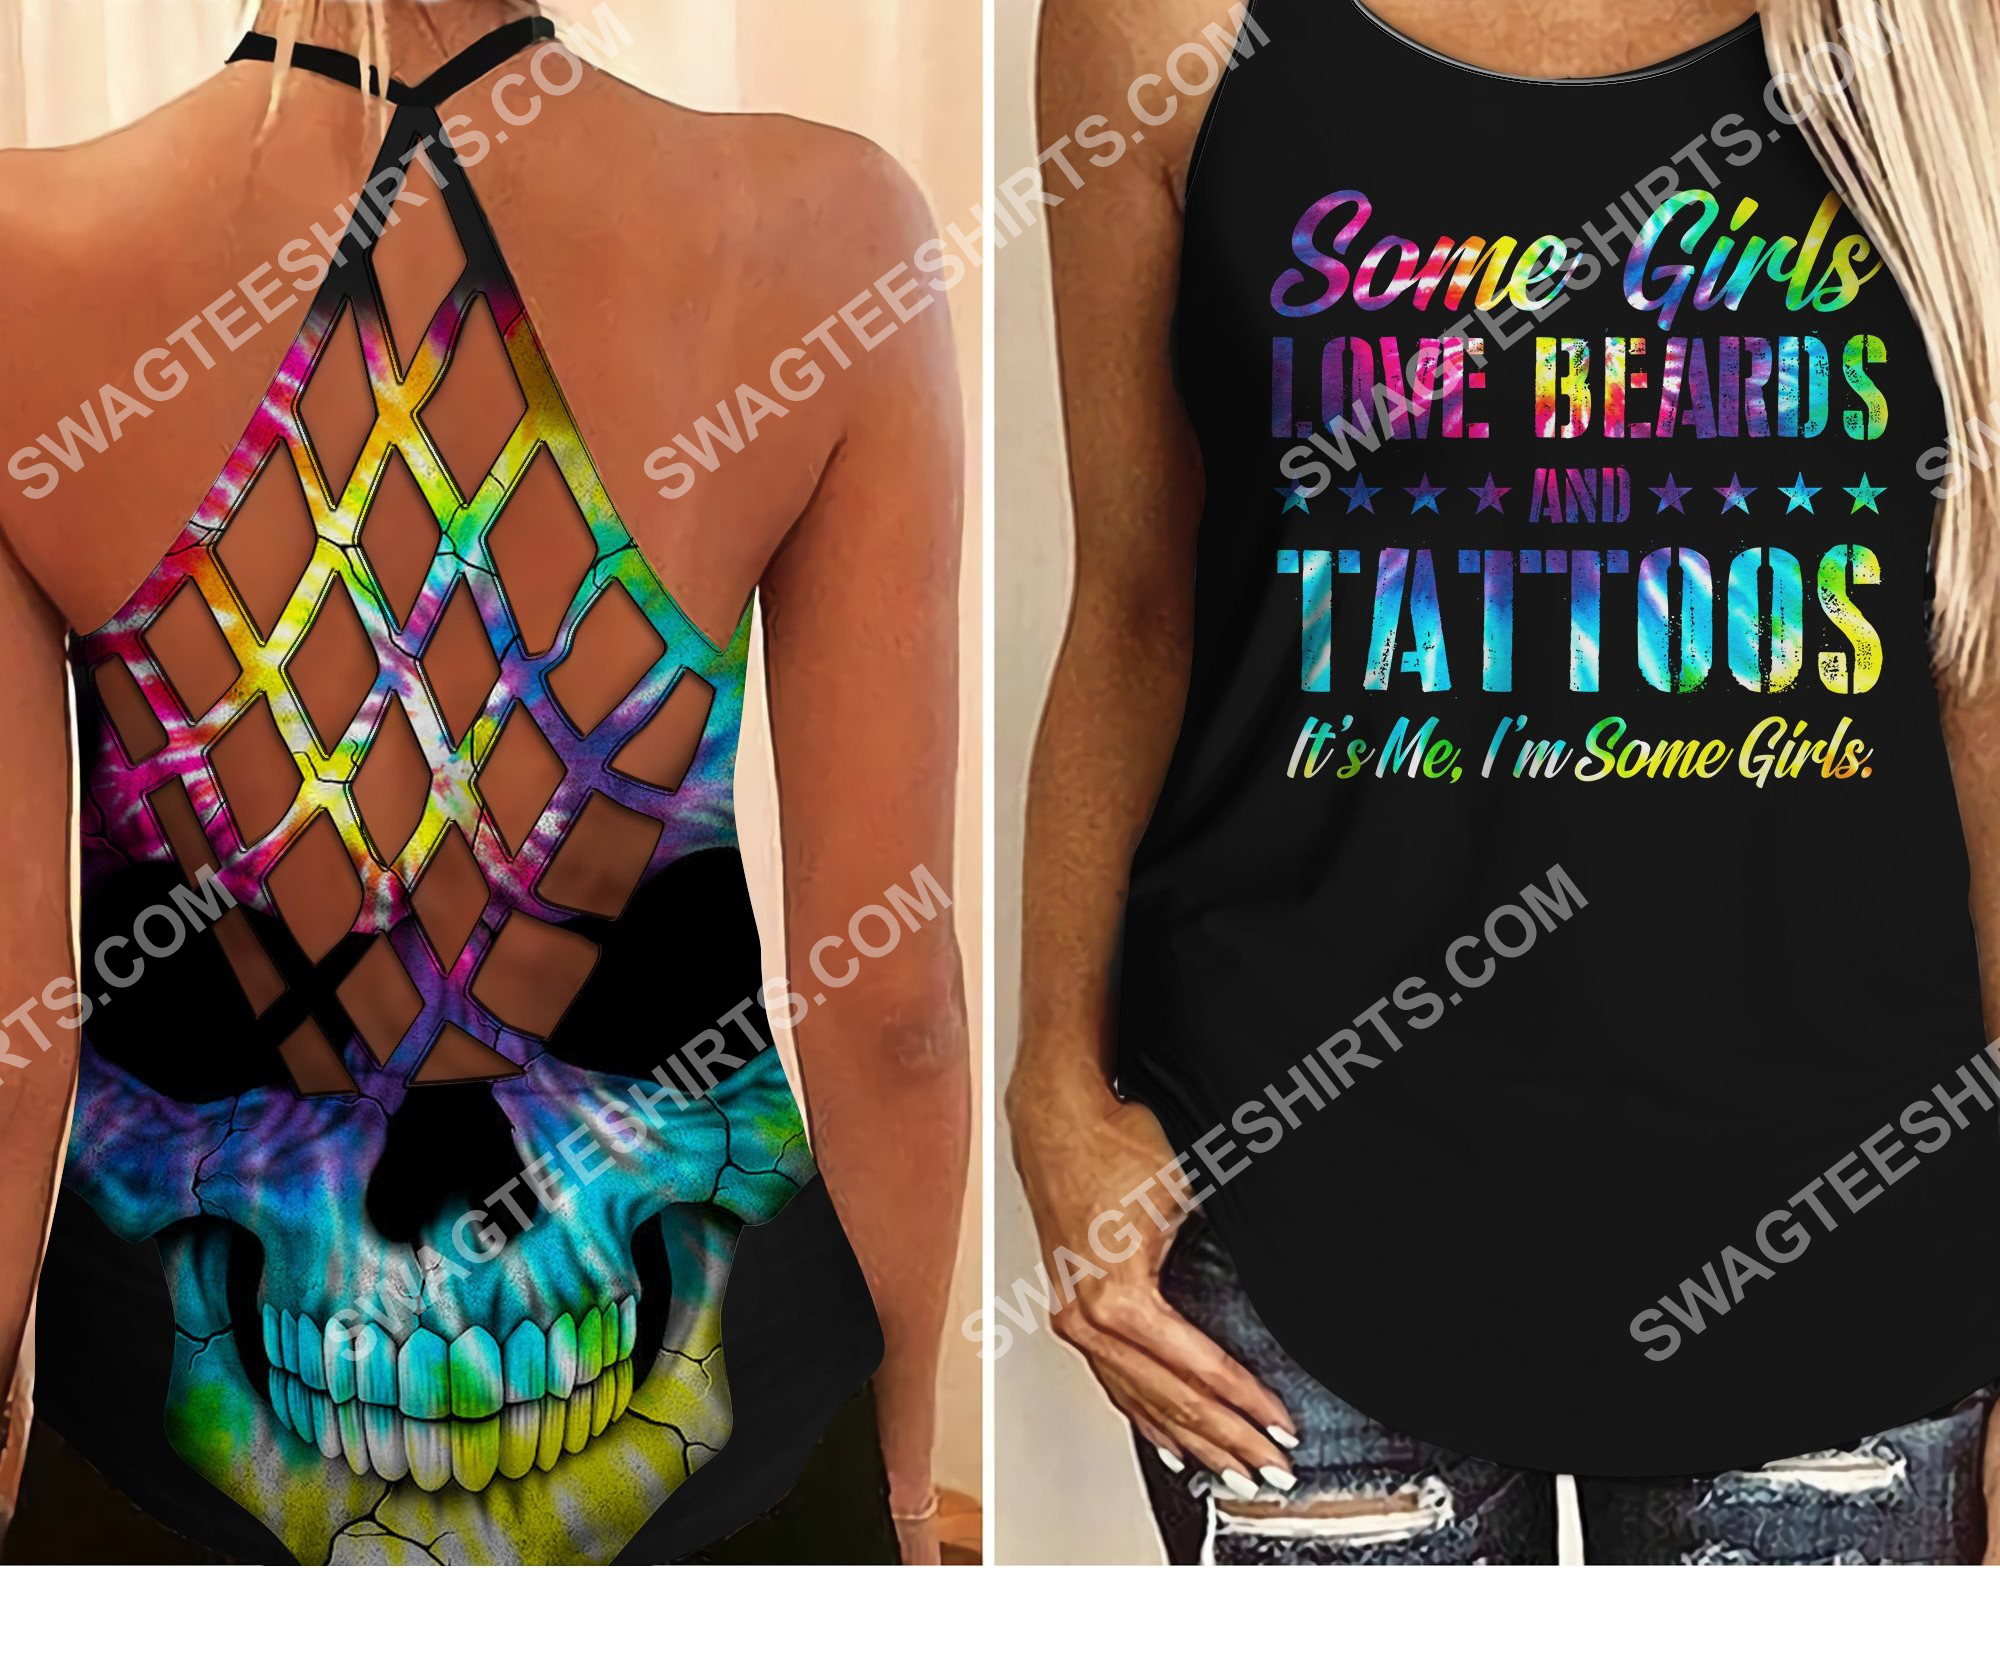 some girls love beards and tattoos it's me i'm some girls criss-cross tank top 2 - Copy (2)